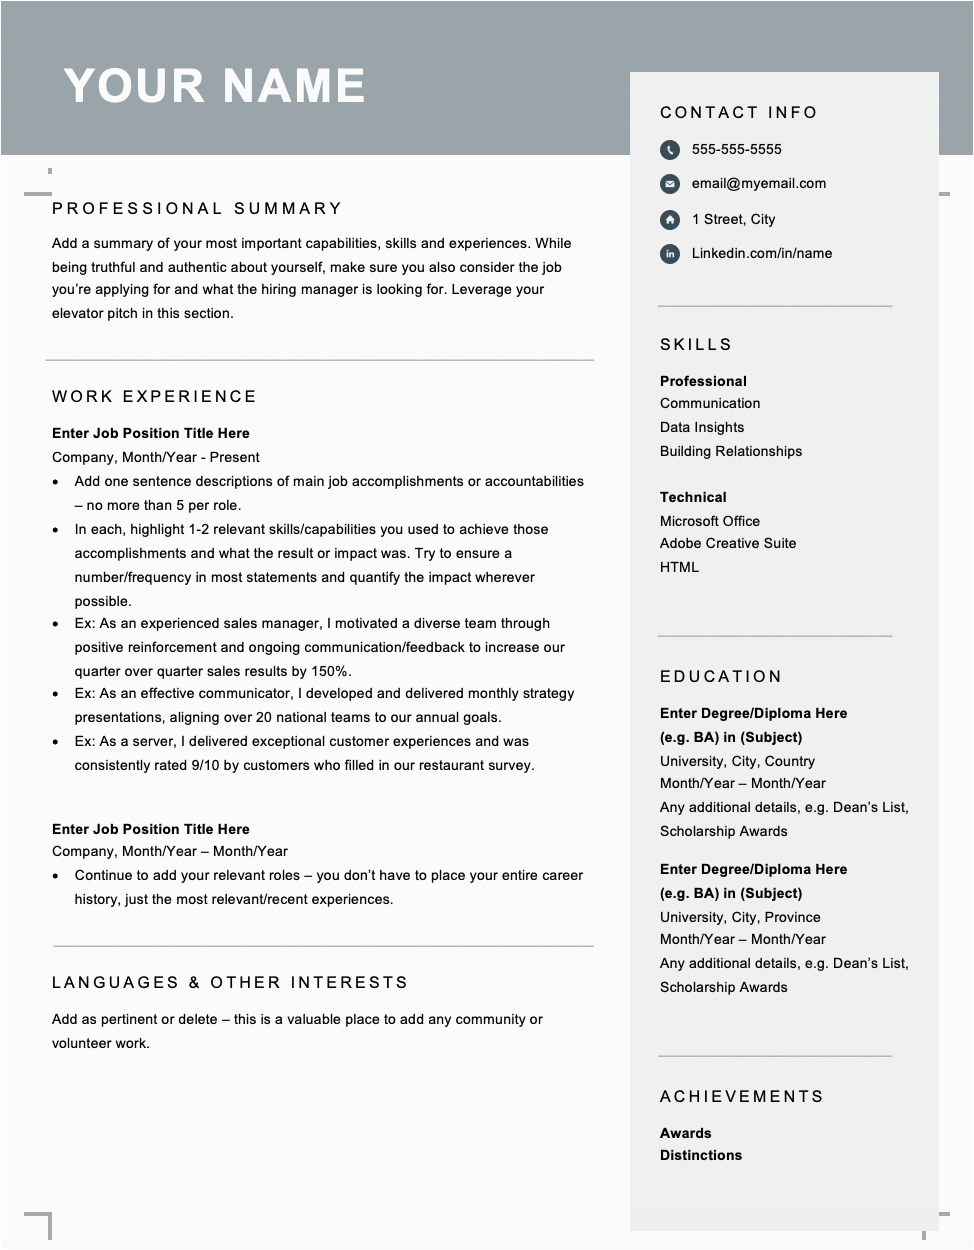 Sample Resumes for Jobs In Canada Canadian Resume & Cover Letter format Tips & Templates